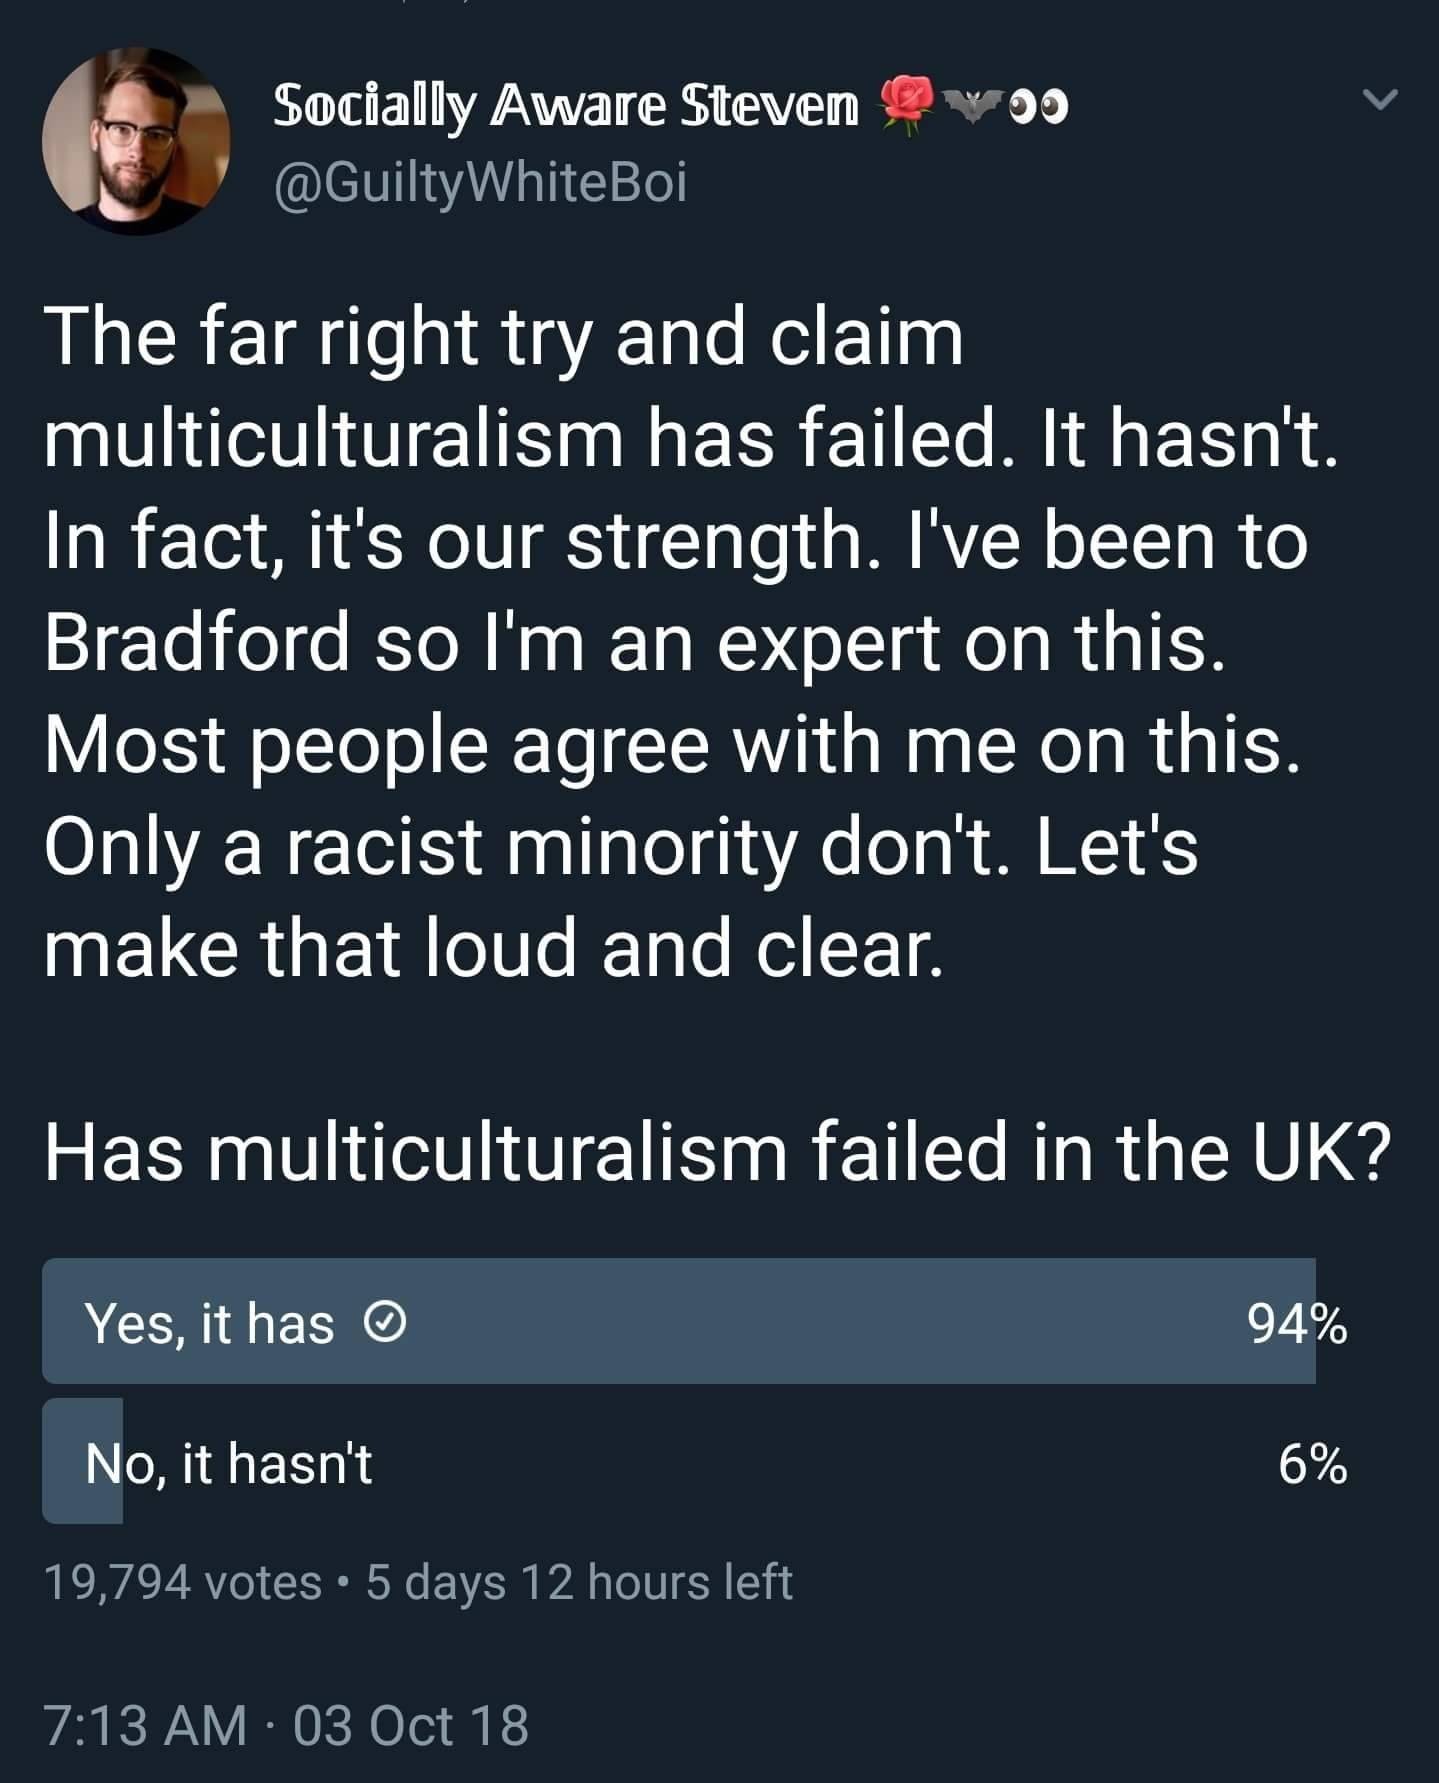 screenshot - vo Socially Aware Steven The far right try and claim multiculturalism has failed. It hasn't. In fact, it's our strength. I've been to Bradford so I'm an expert on this. Most people agree with me on this. Only a racist minority don't. Let's ma